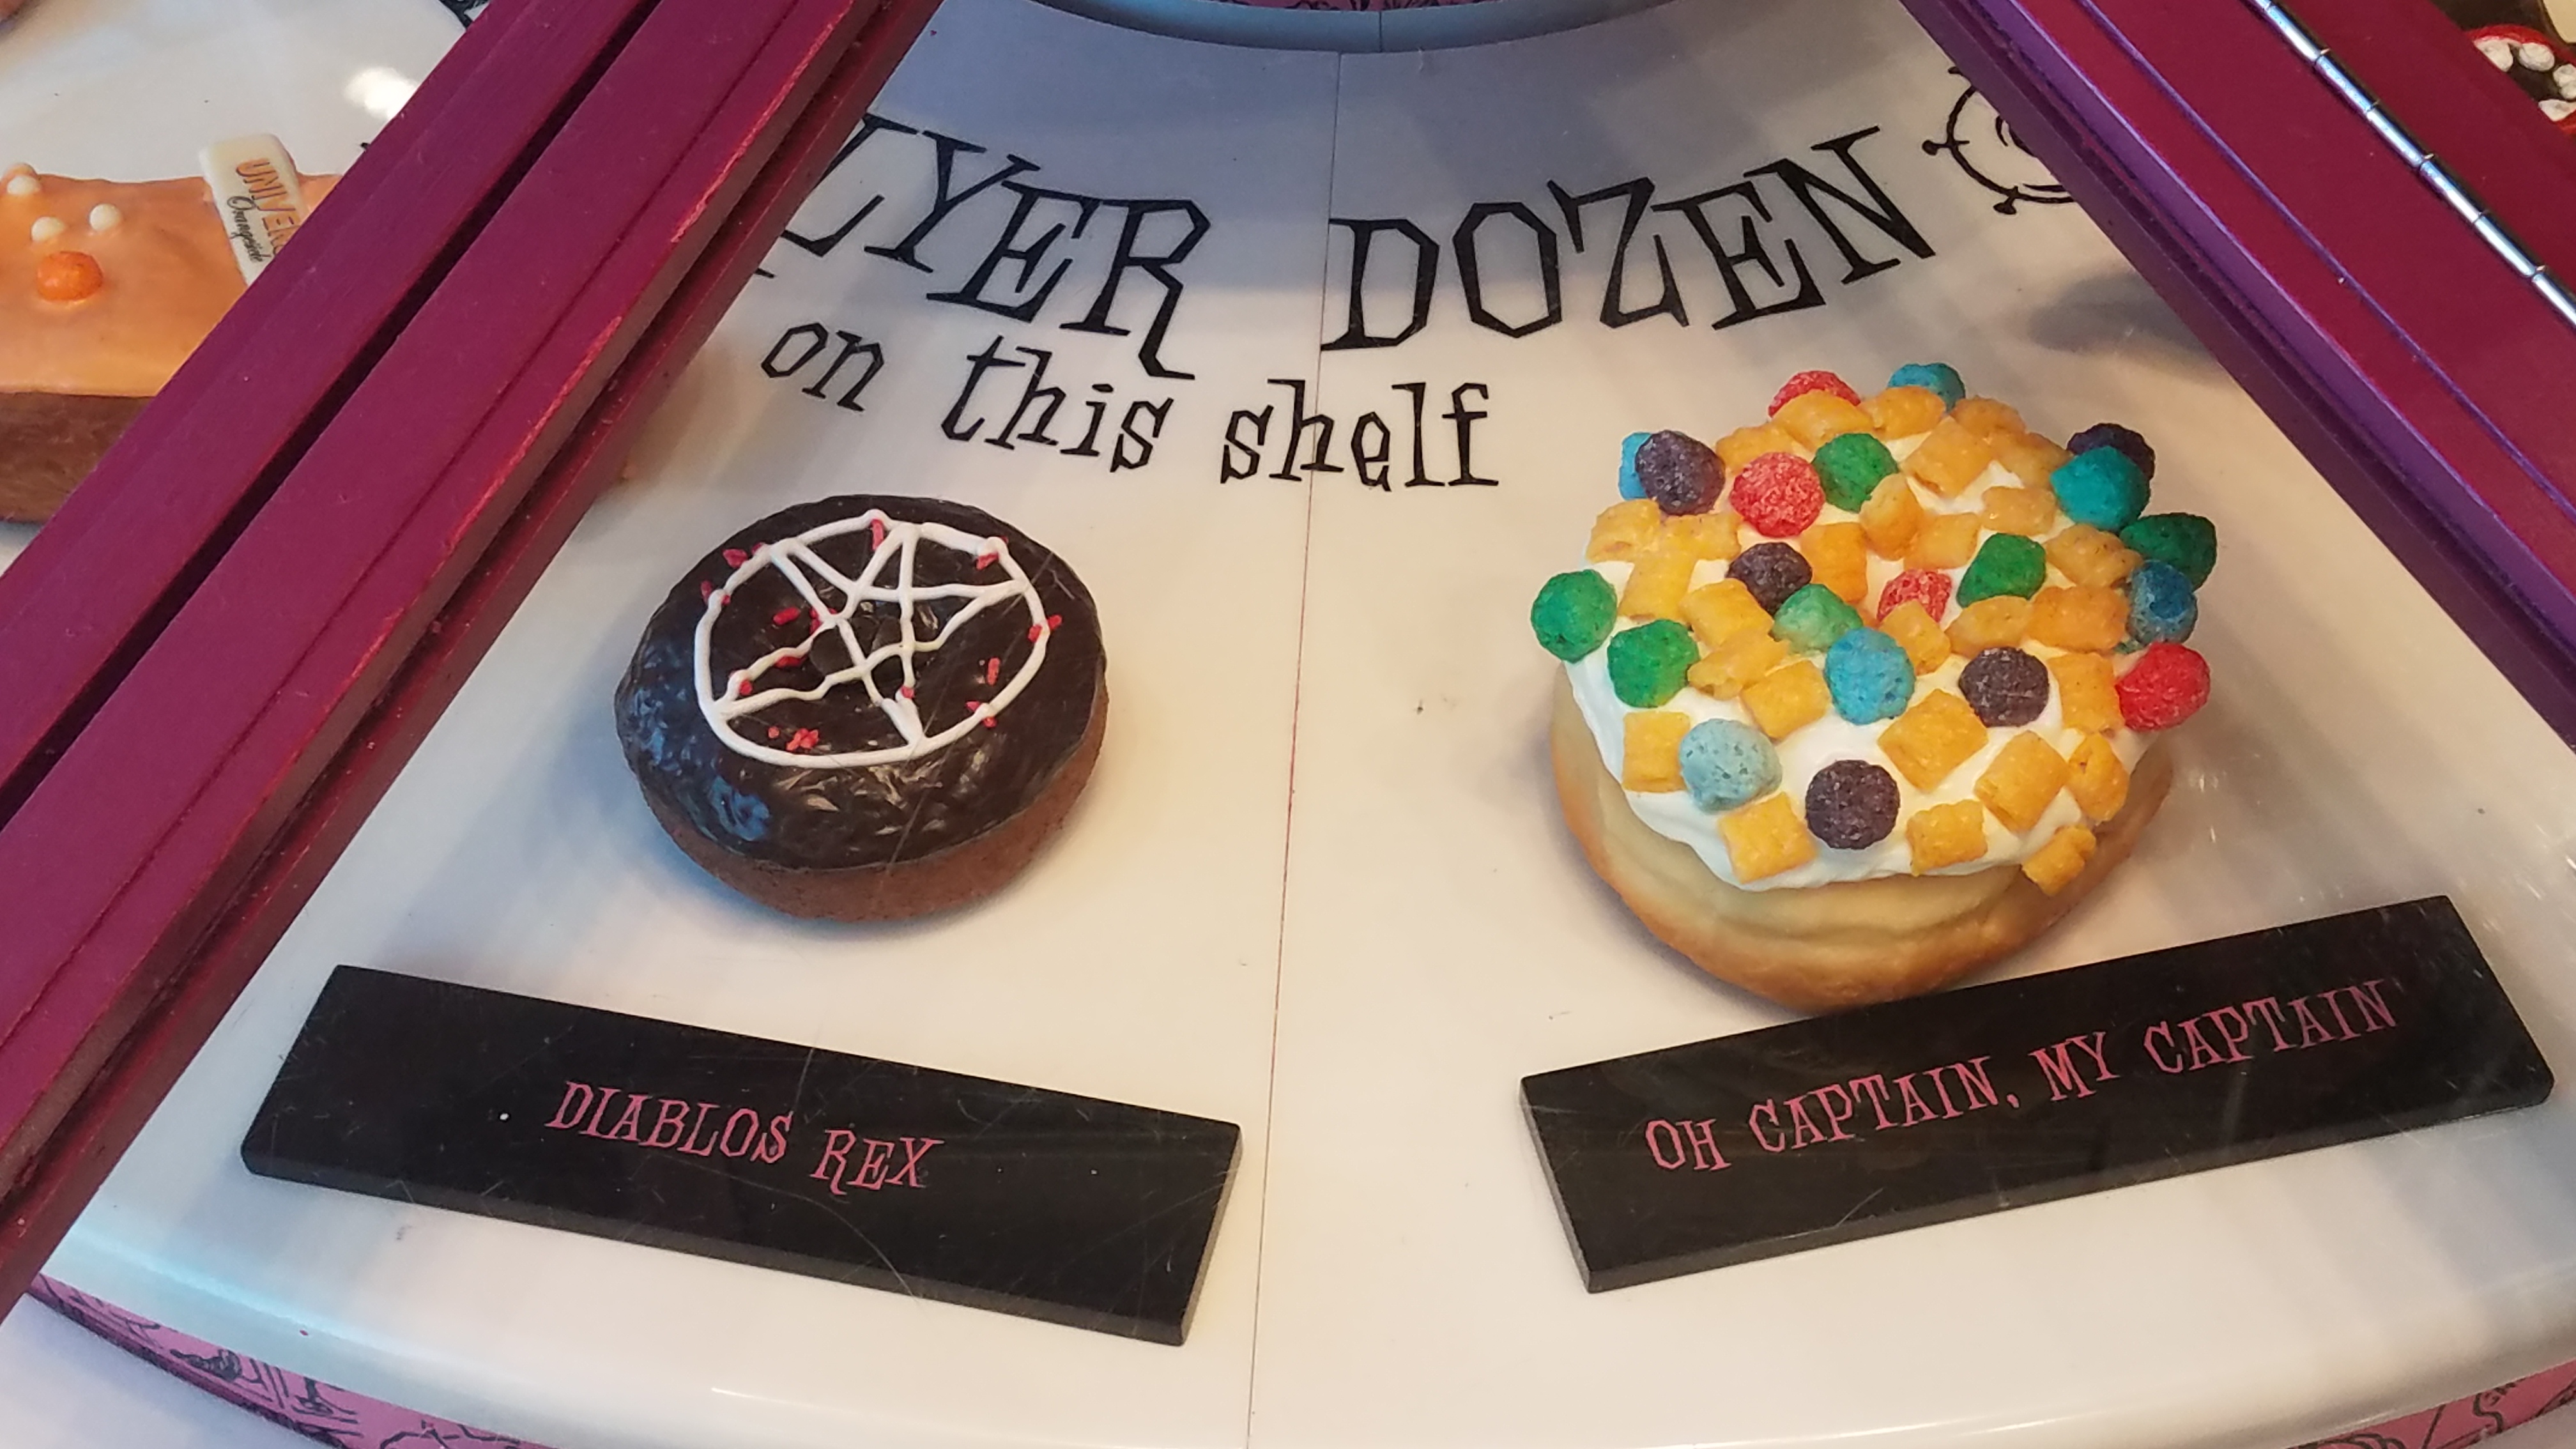 Specialty doughnuts at Voodoo Doughnuts at Universal's CityWalk - by unofficialuniversal.com.